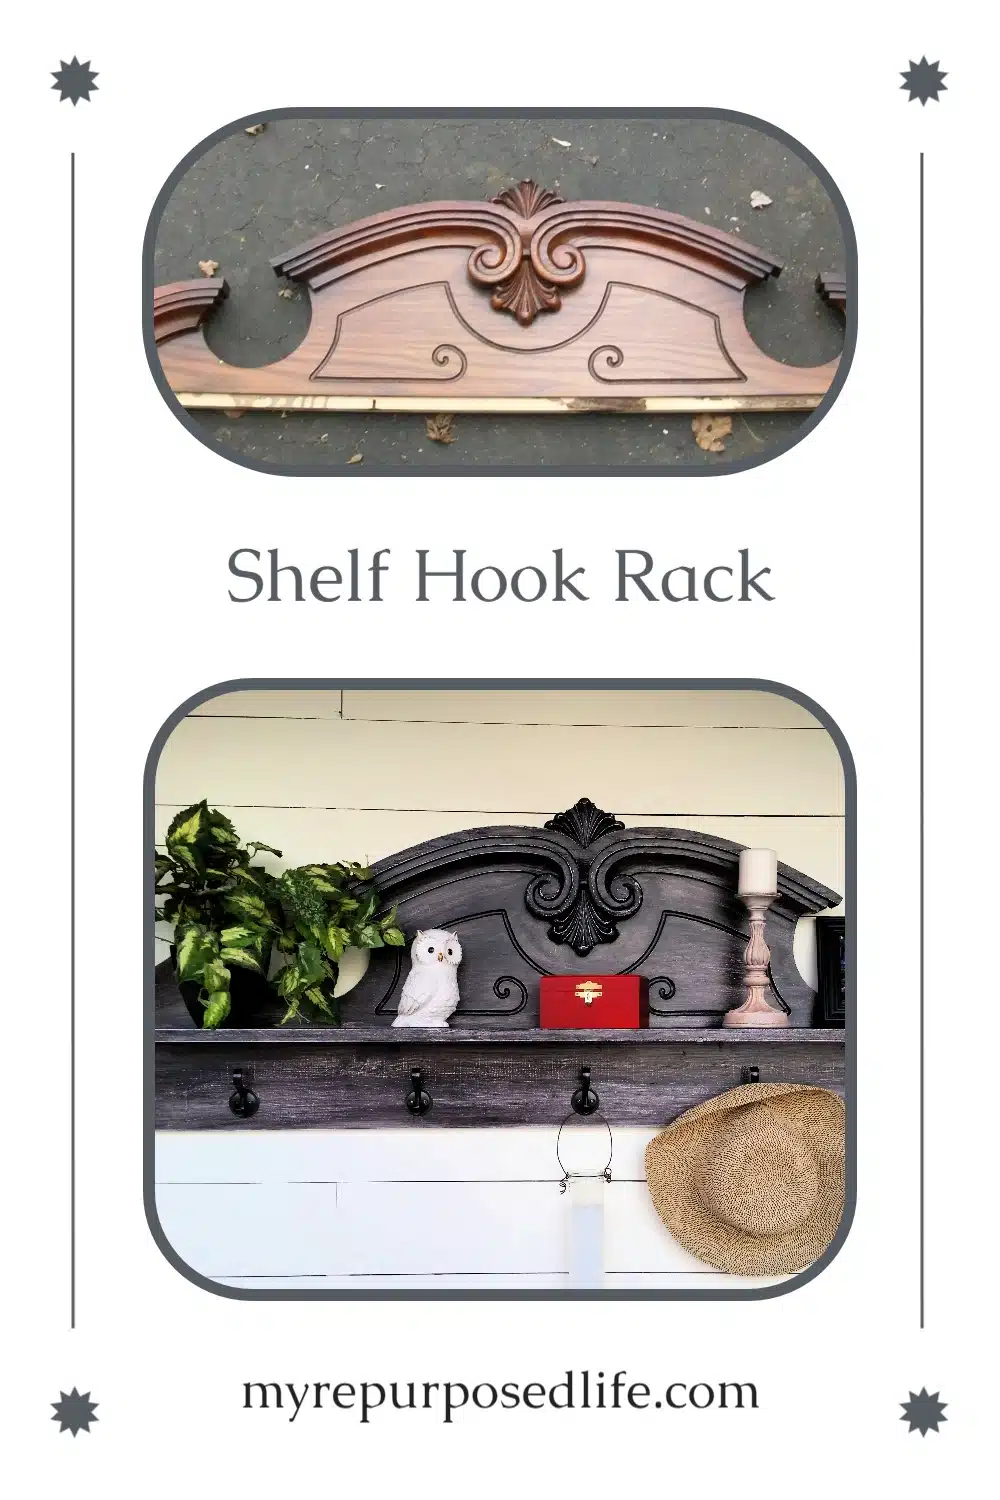 My Repurposed Life did a makeover on this awesome china hutch topper! Now it's a coat rack shelf! #MyRepurposedLife #repurposed #furniture #coatrack #shelf via @repurposedlife